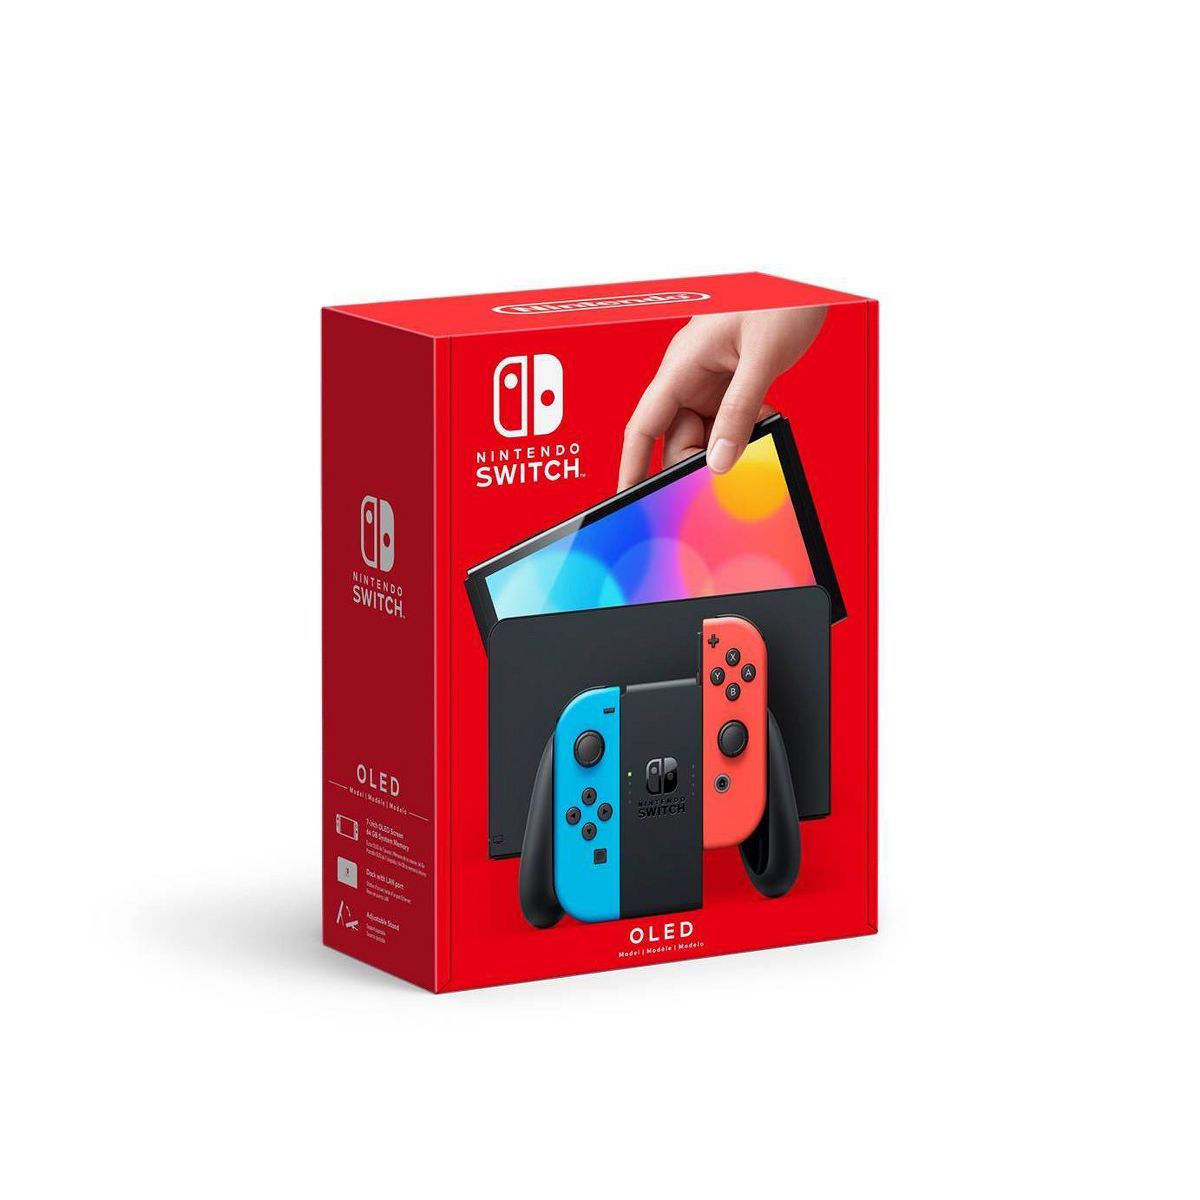 Nintendo Switch - OLED Model with Neon Red & Neon Blue Joy-Con | Target